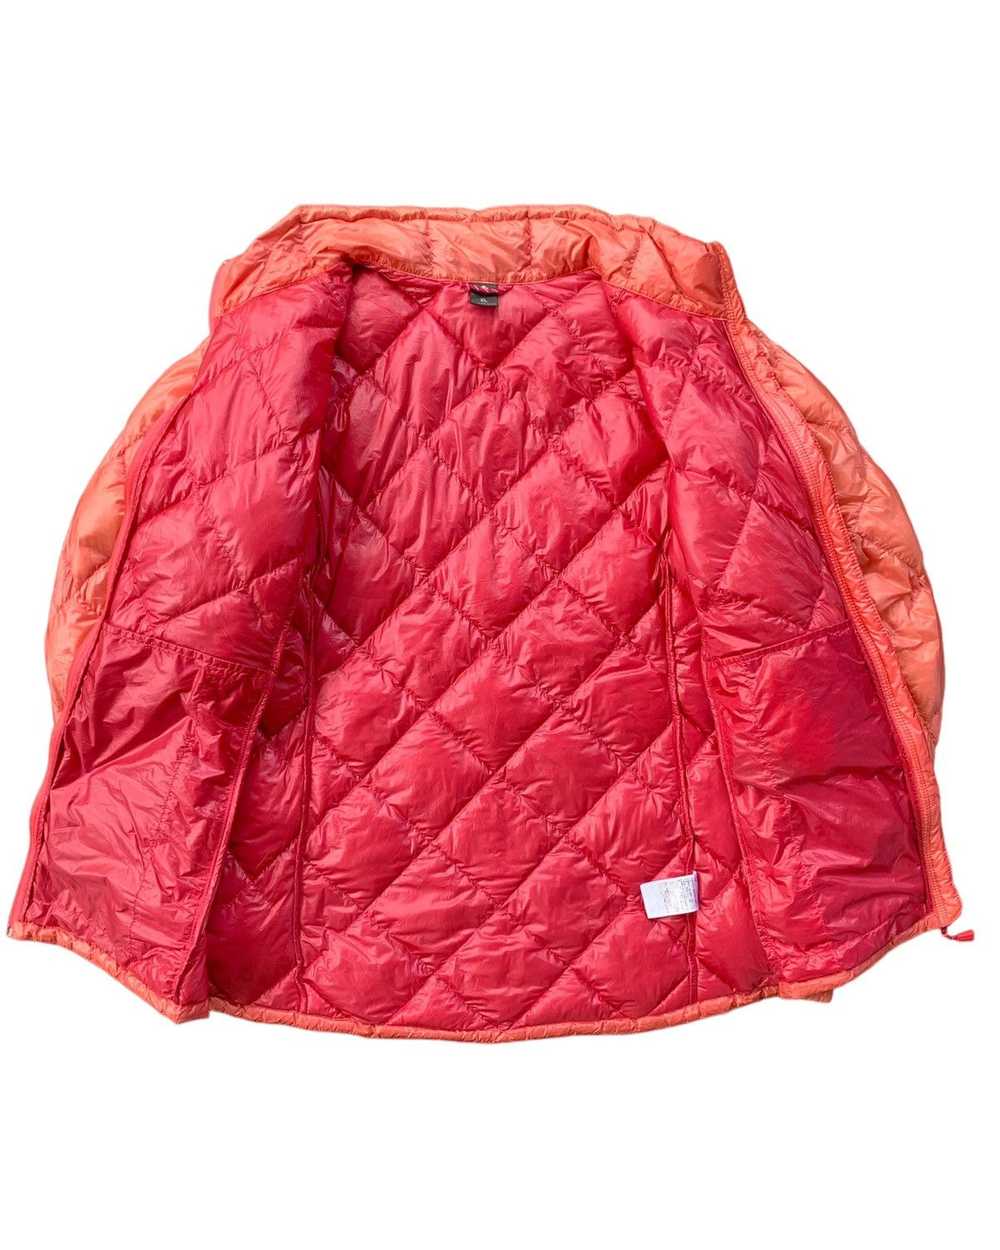 Montbell 2000s Diamond Lightweight Down Jacket - image 7